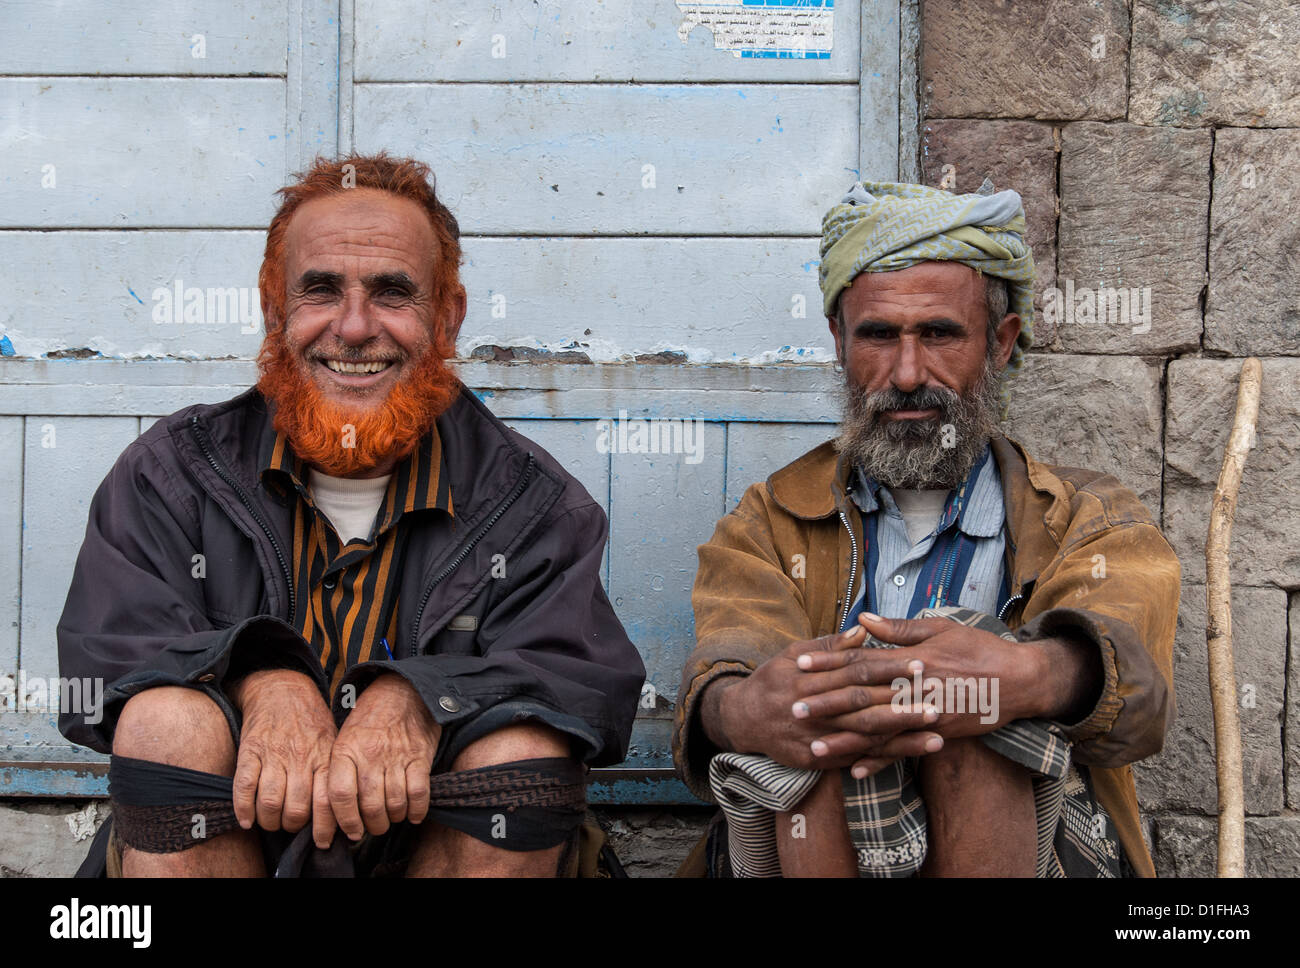 Two smiling men pose in front of a store on May 4, 2007 in Sanaa, Yemen. Stock Photo